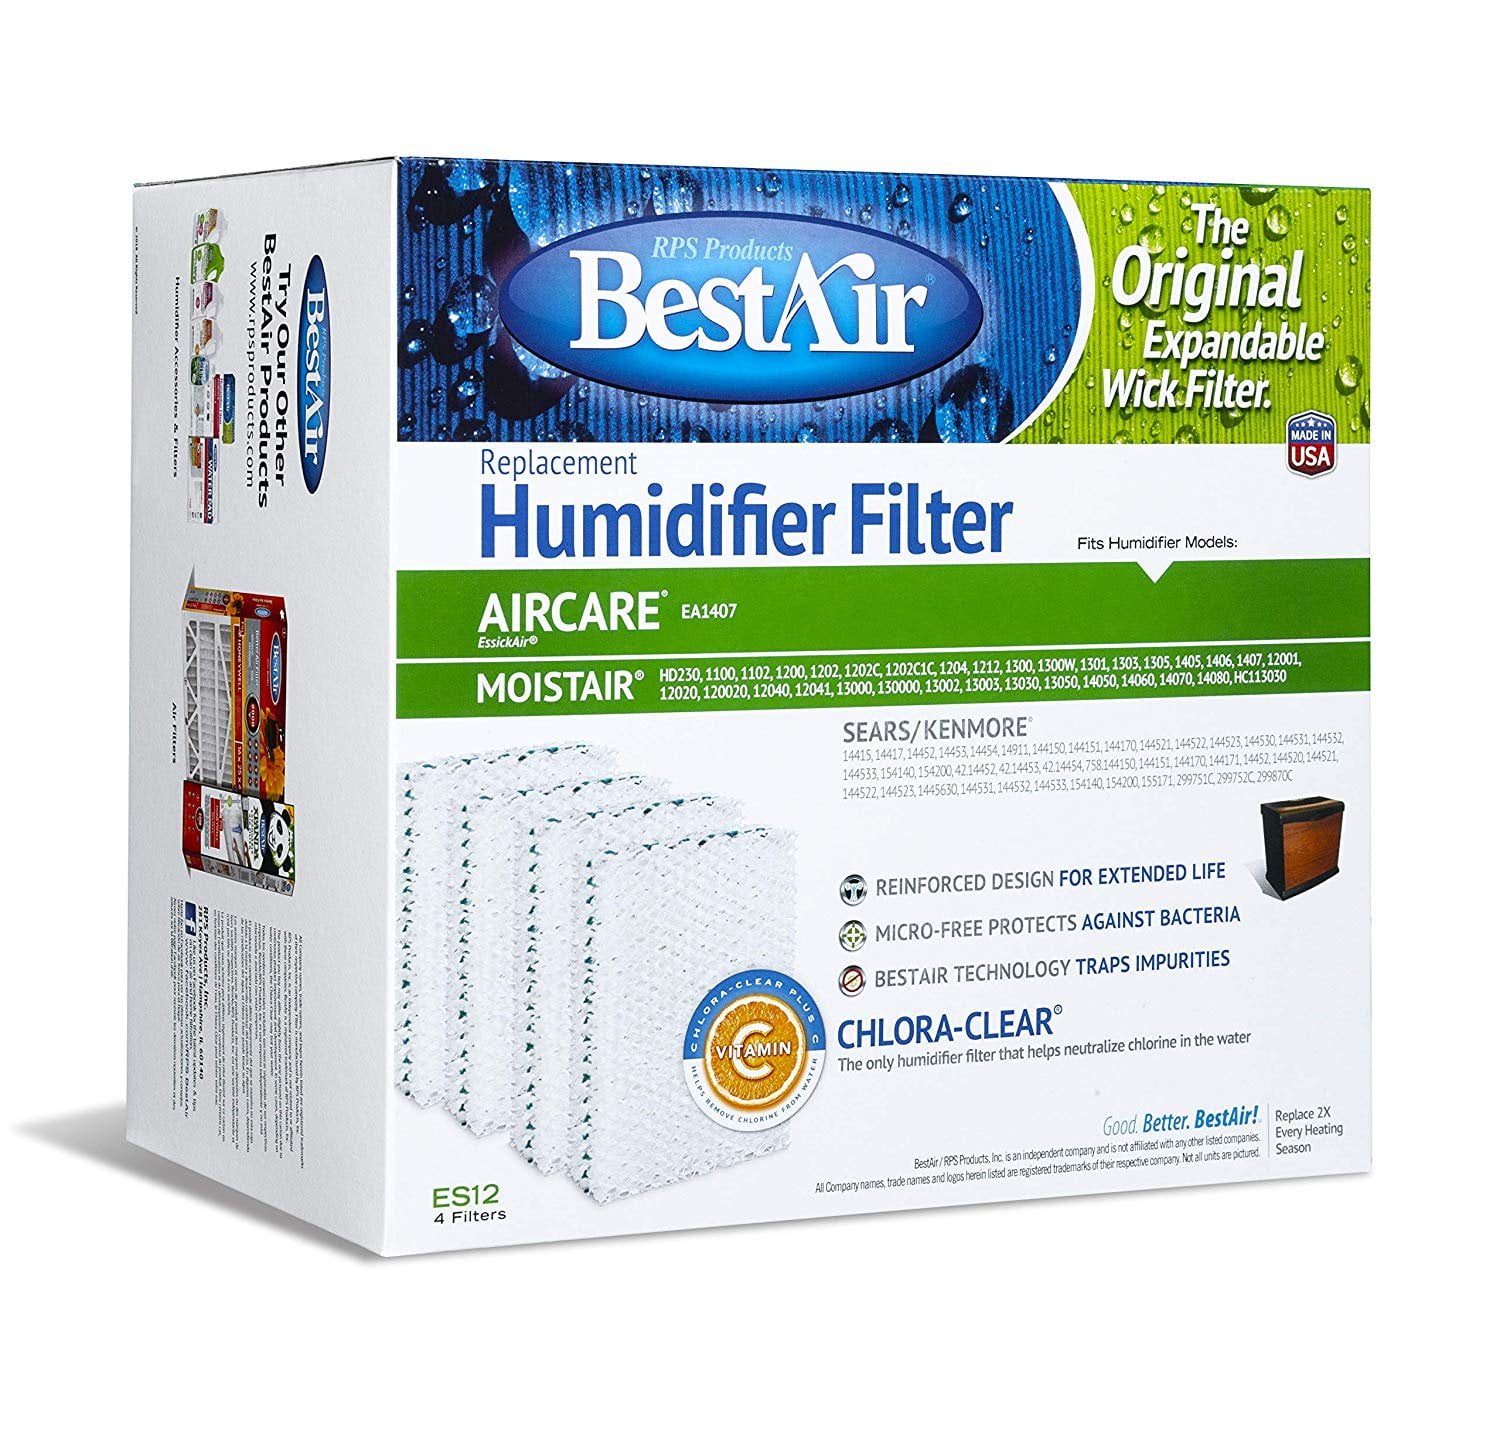 4 RPS BestAir ES12 4 Packs Humidifier Wick Filters for Essick Emerson Kenmore 